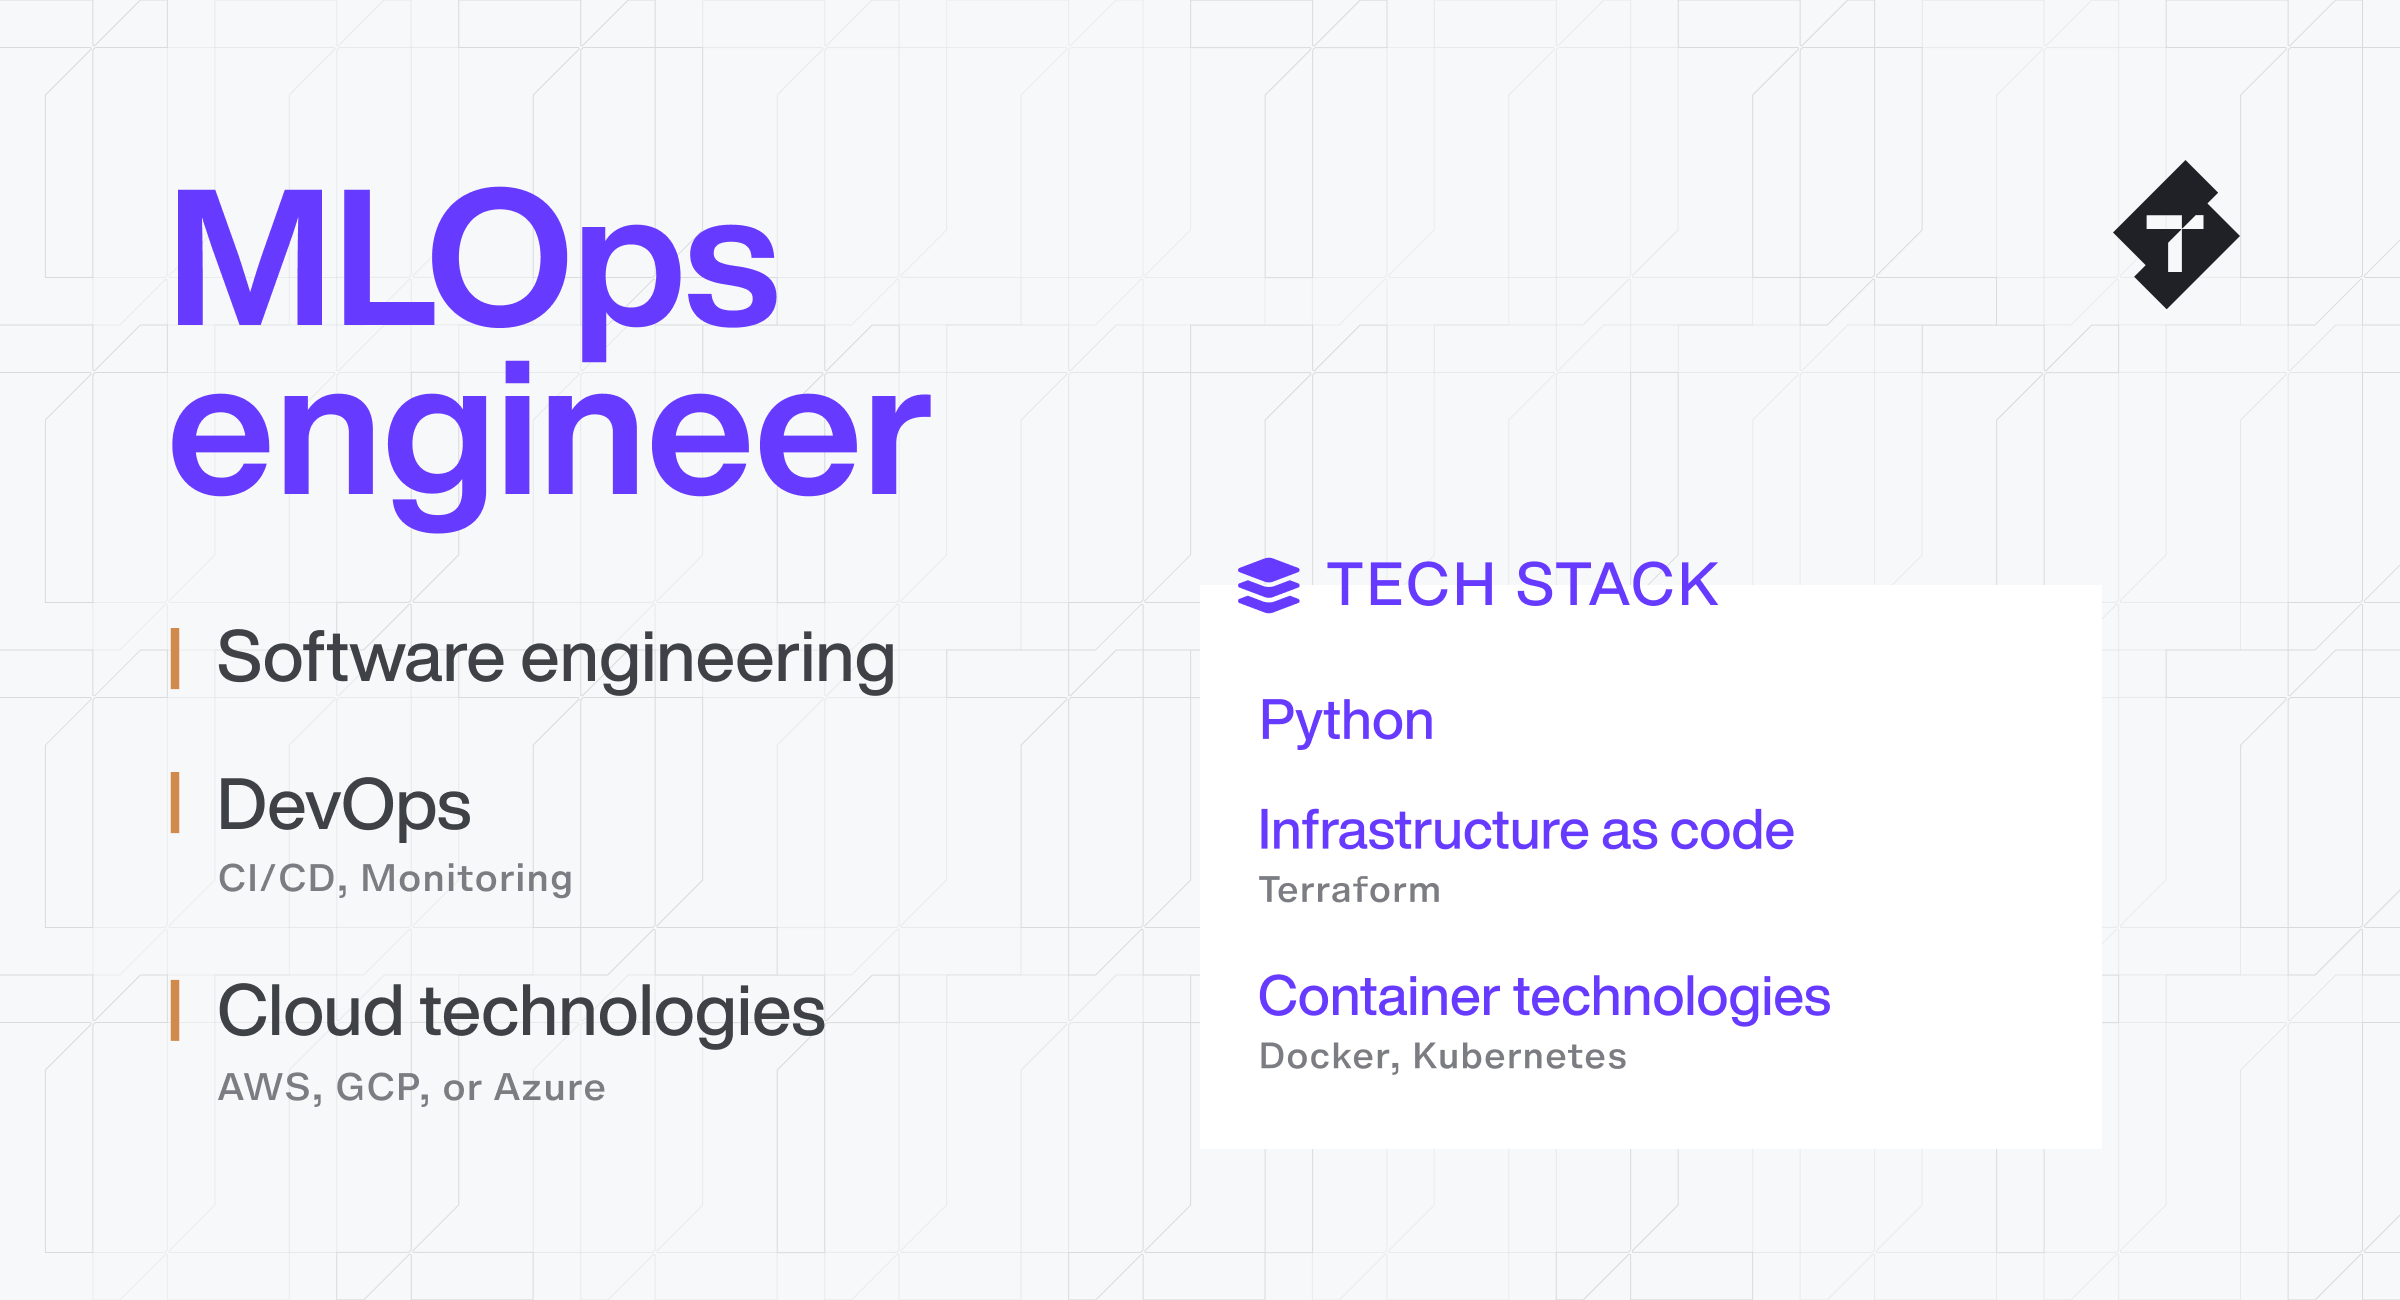 MLOps engineer skills and tech stack